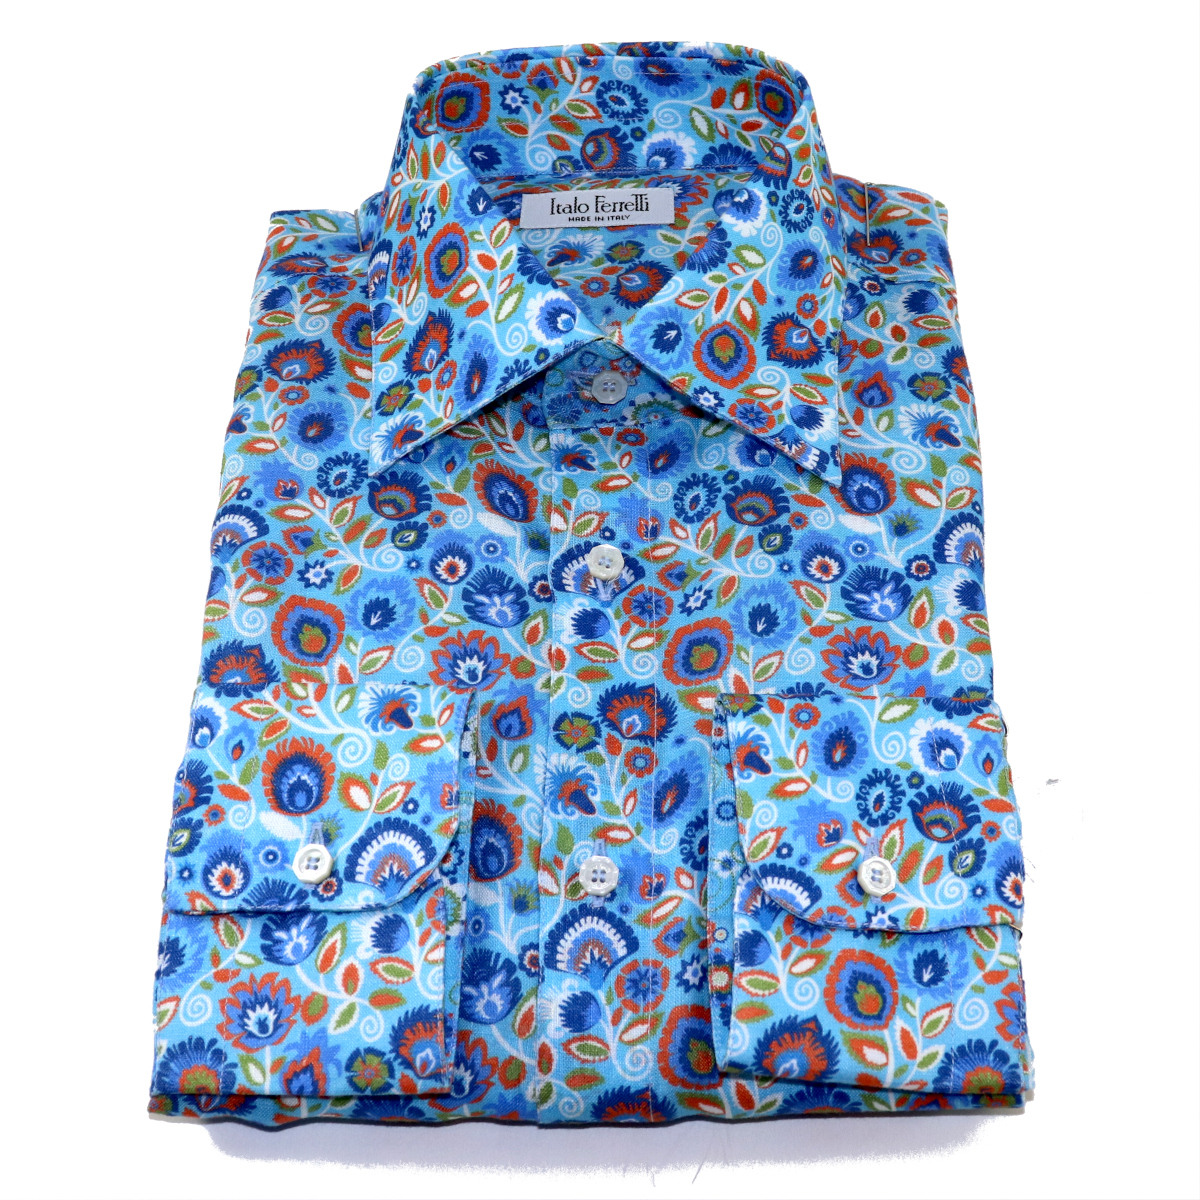 Long sleeves 100% linen shirt, red and light blue floral pattern ...